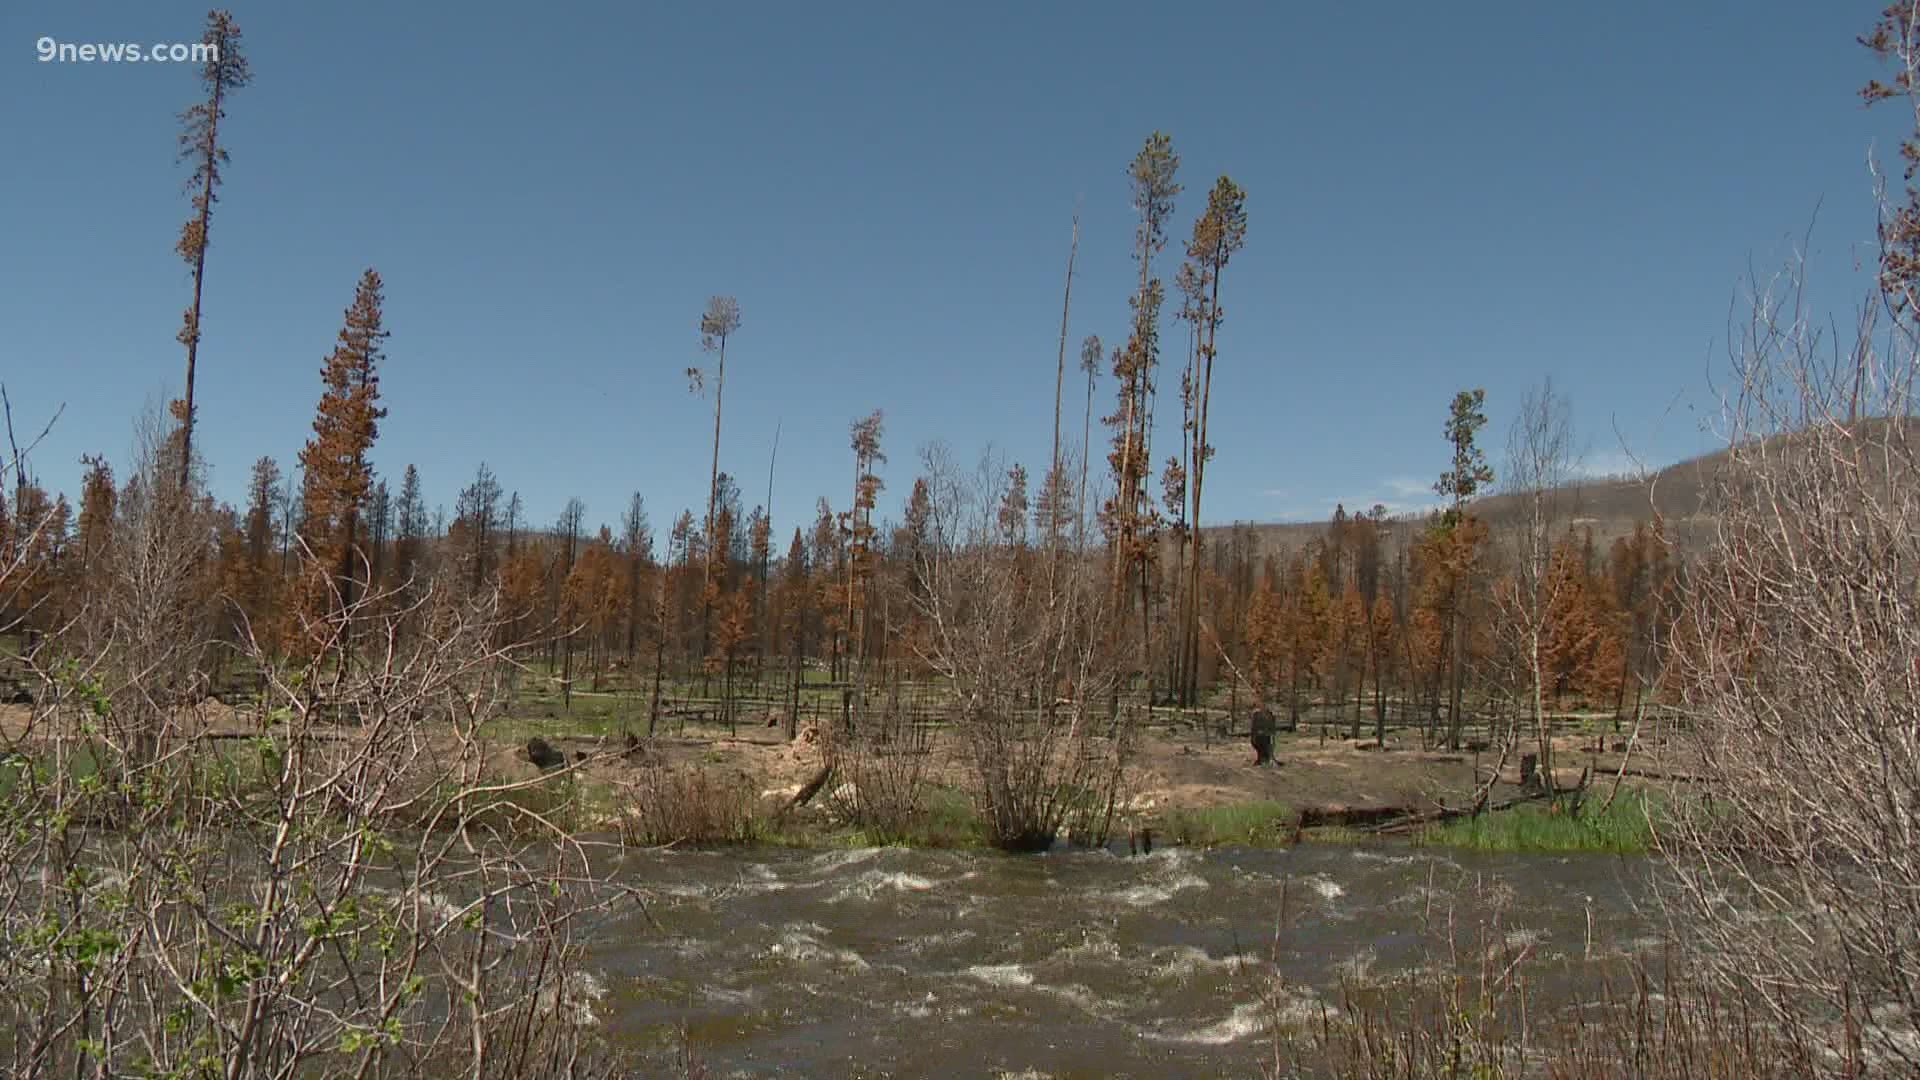 Researchers are still working to learn more about the potential long term effects of the East Troublesome Fire on the area's water supply and ecosystem.